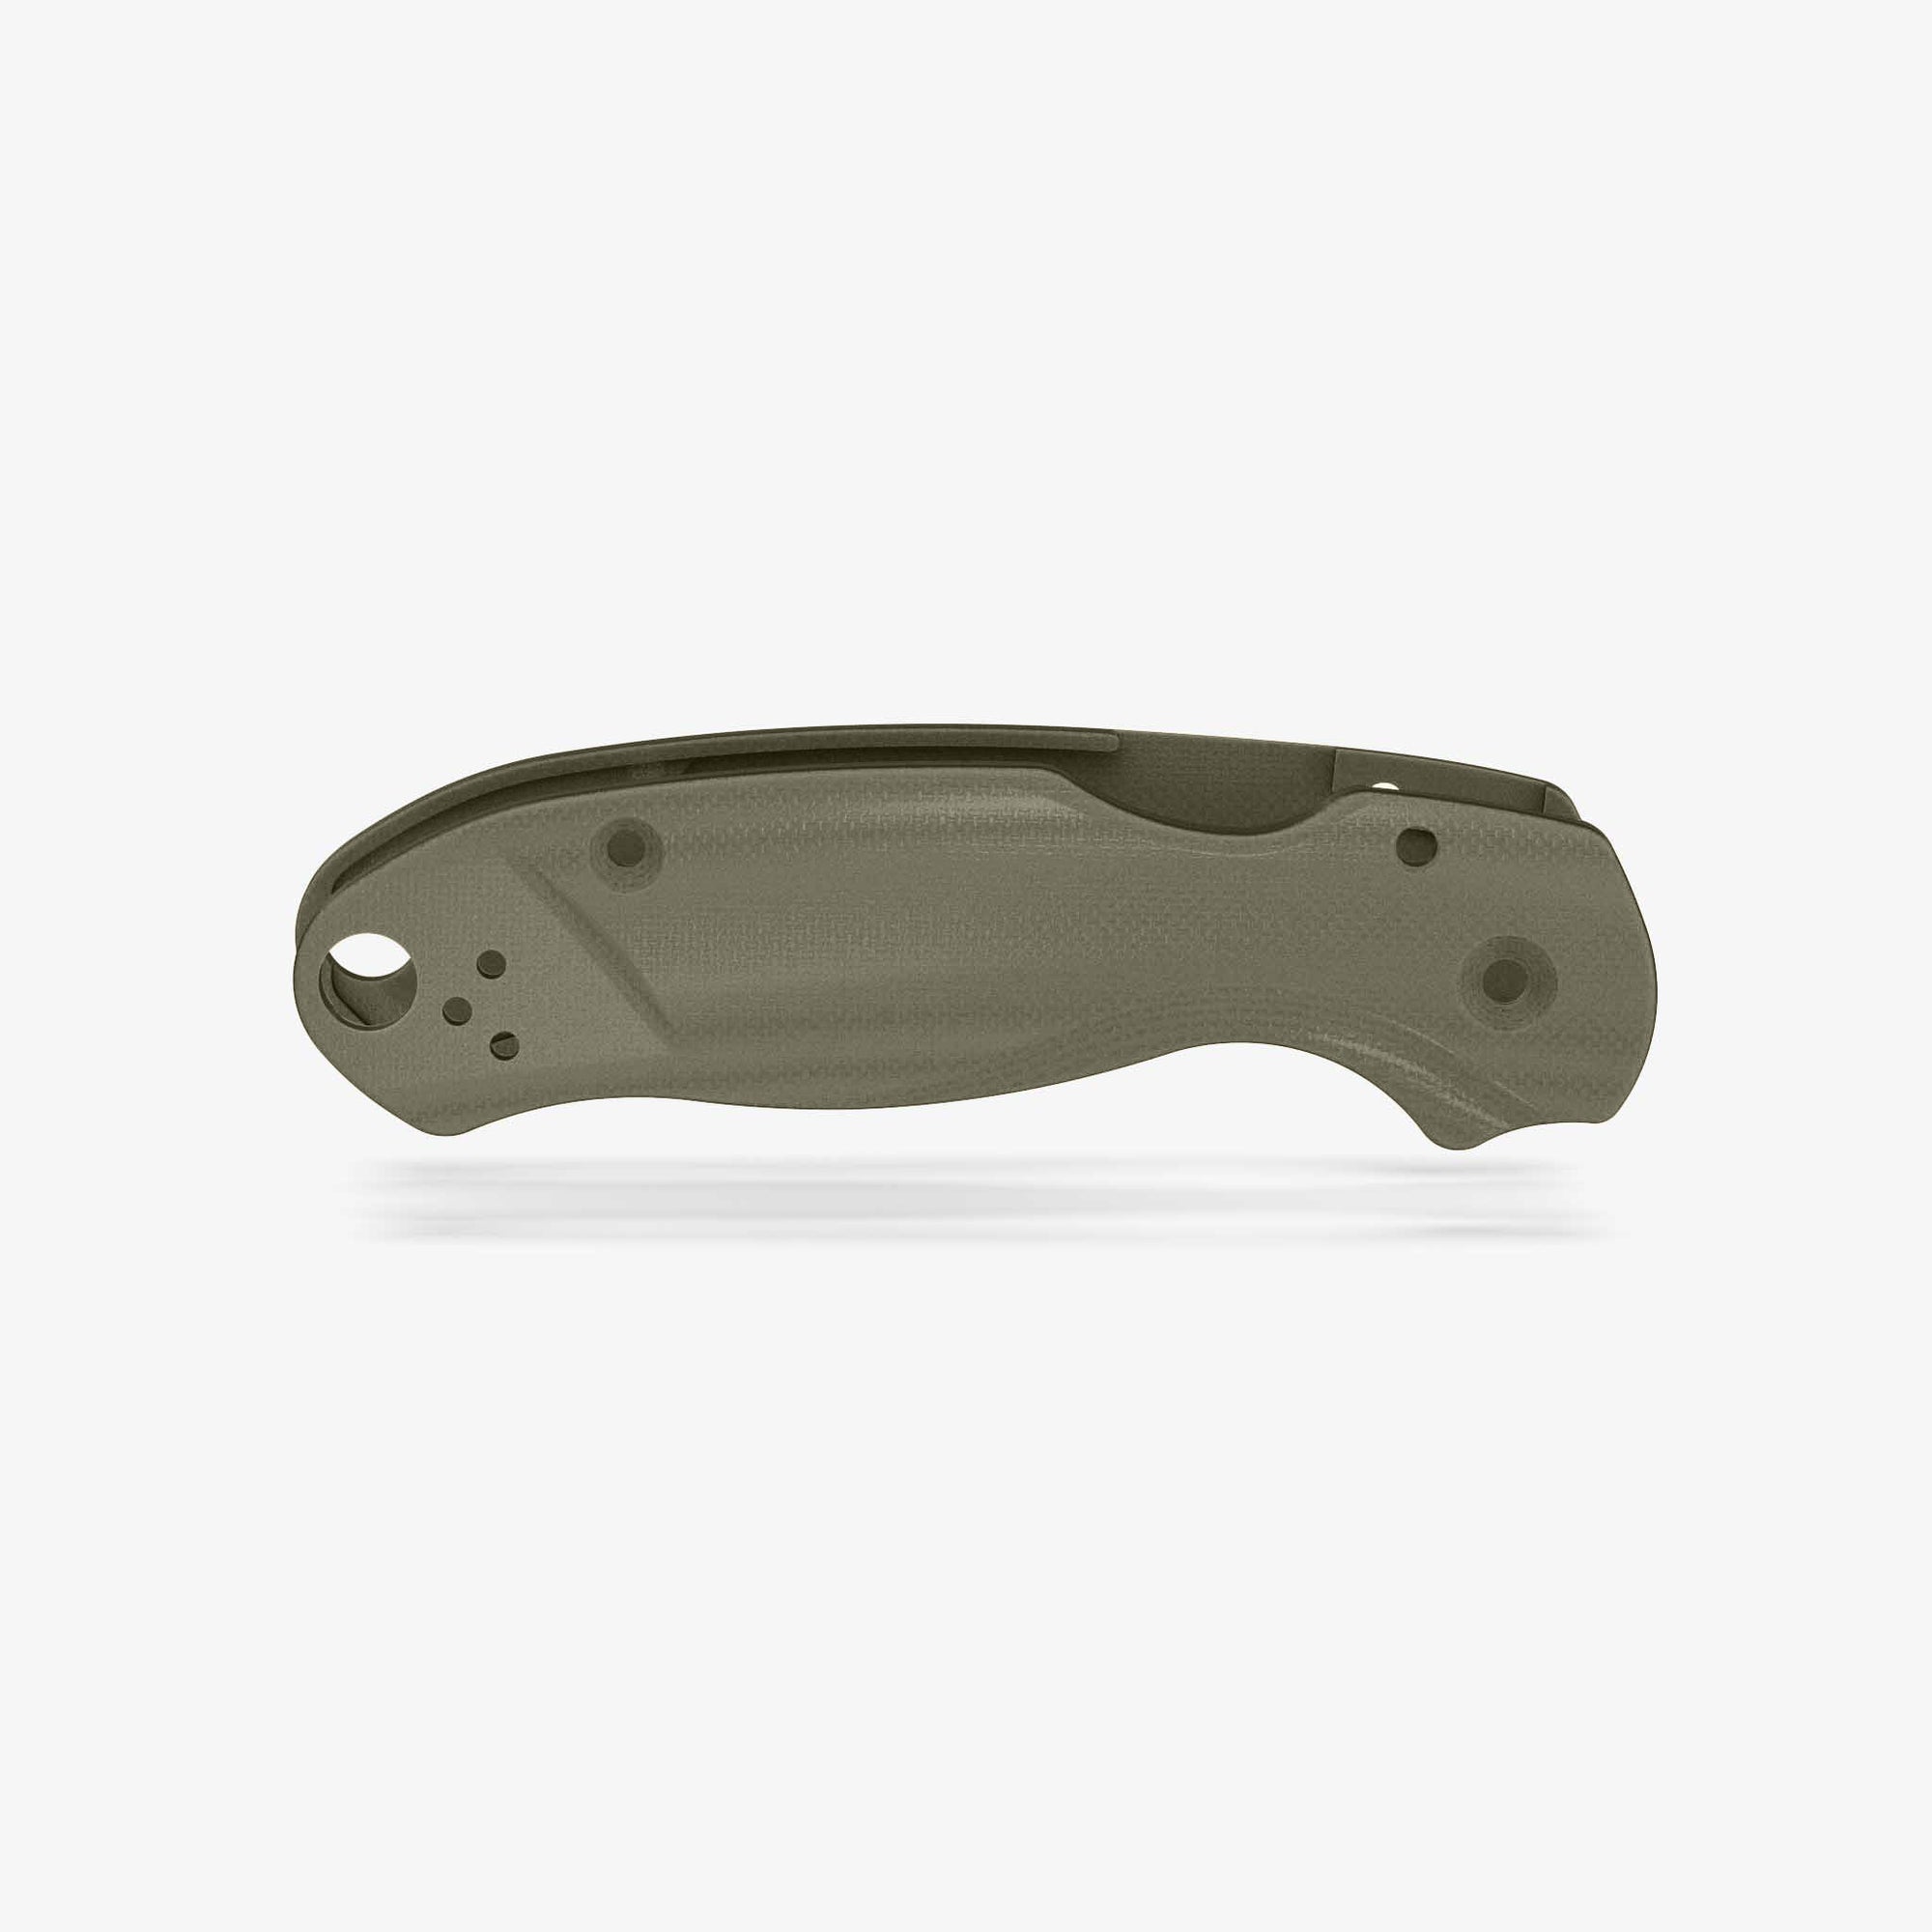 Lotus G-10 Scales for Spyderco Para 3 Knife